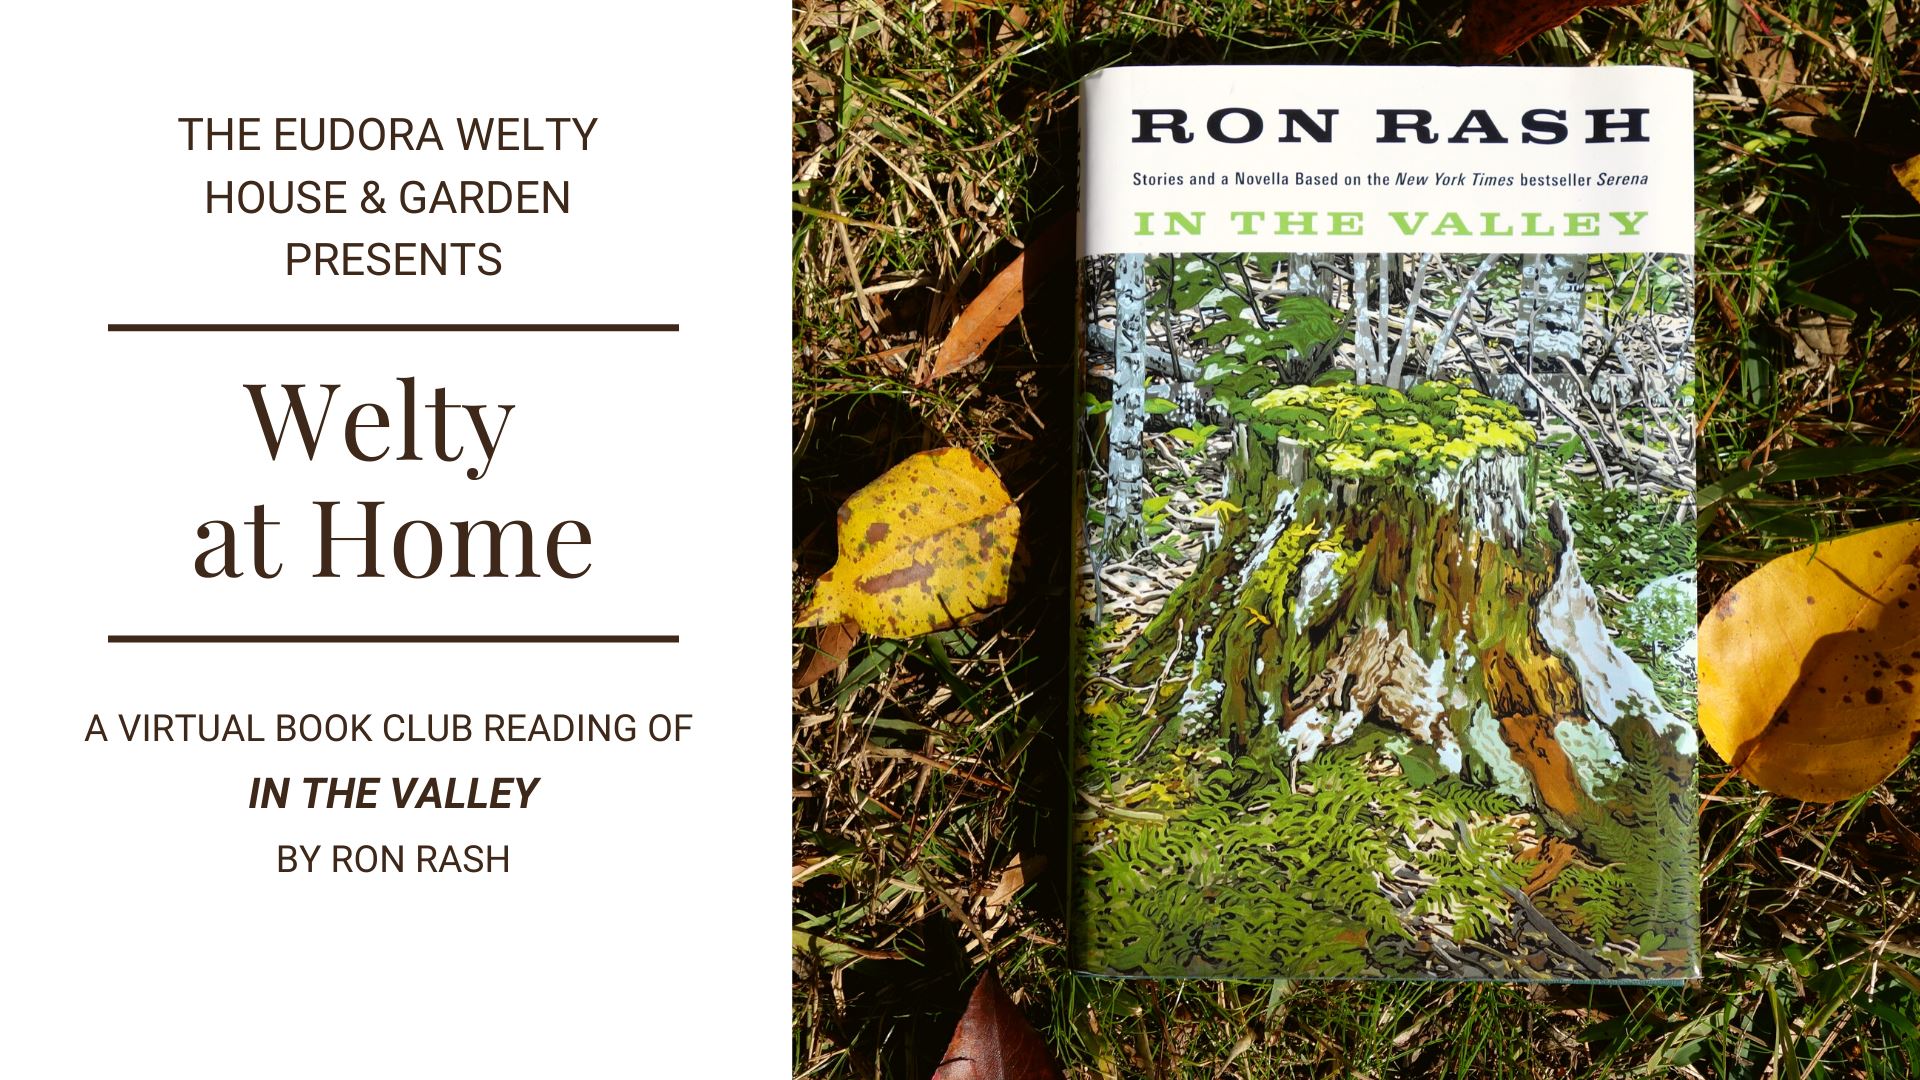 Image of Ron Rash's book In the Valley